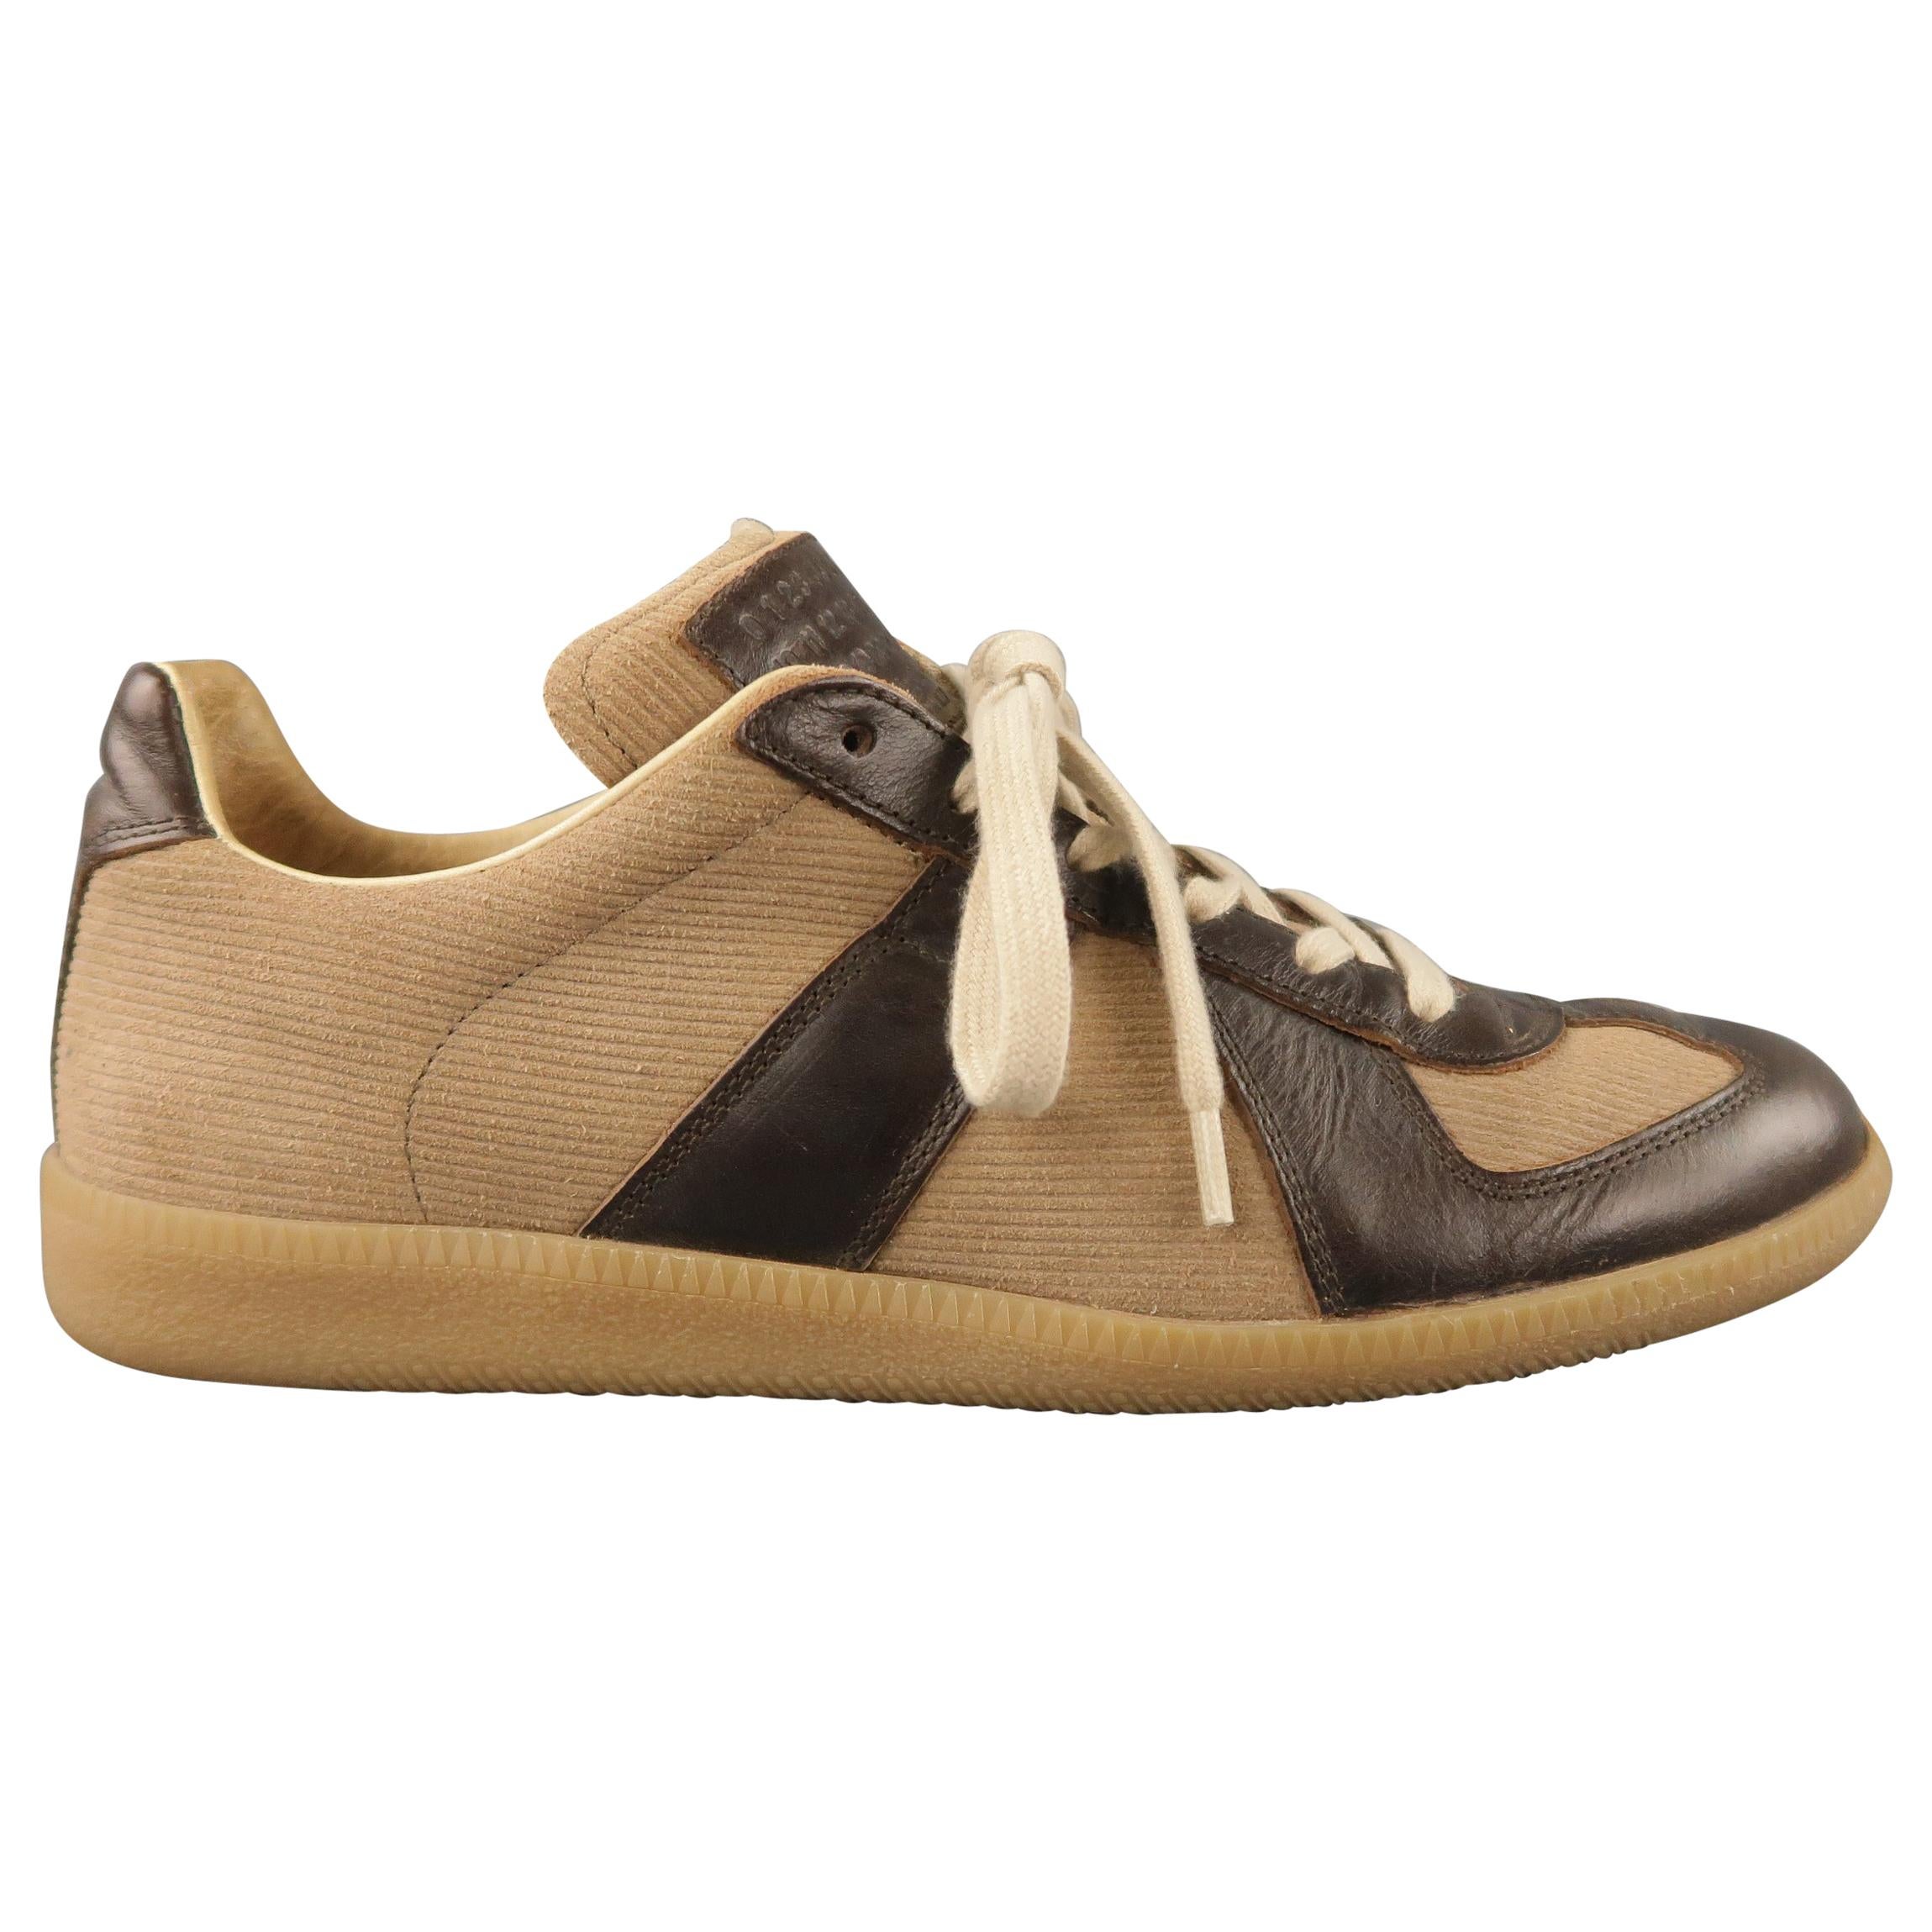 MAISON MARTIN MARGIELA Size 7 'REPLICA' Brown Canvas Lace Up Sneakers